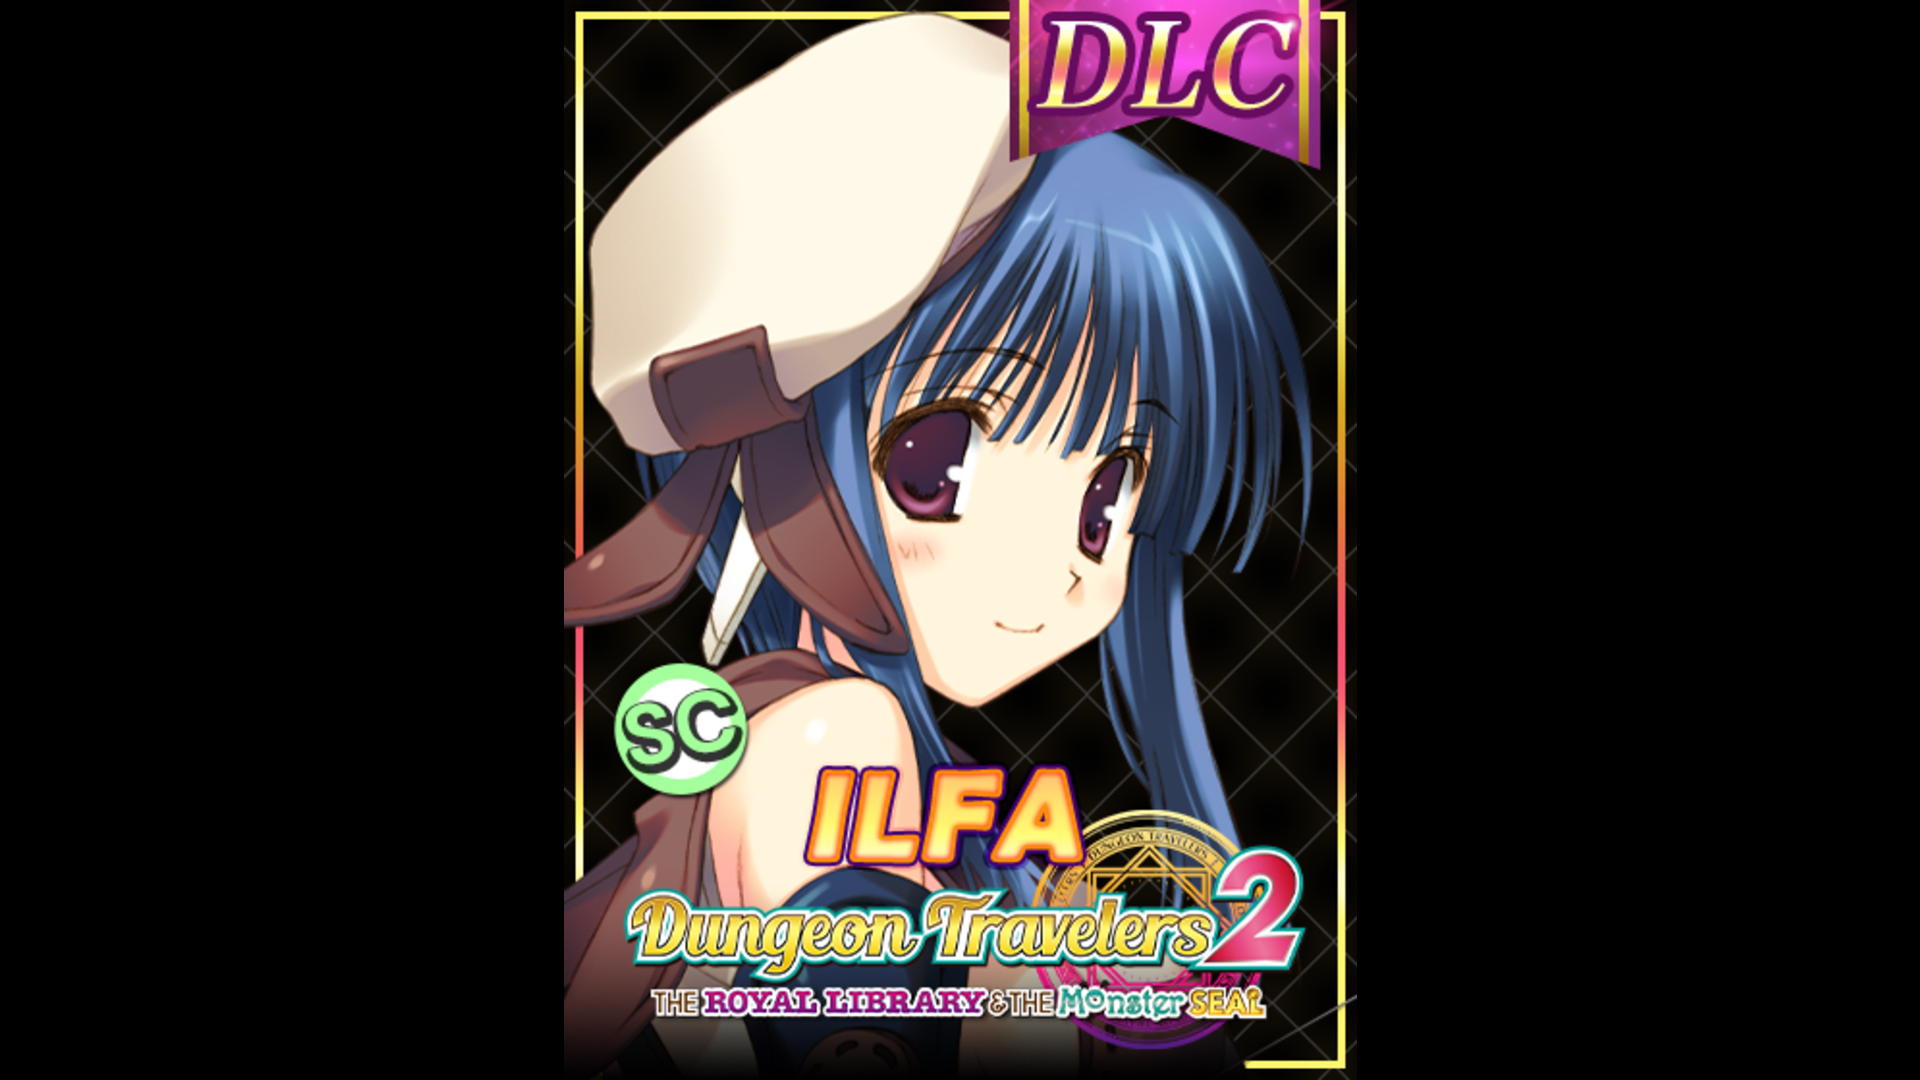 DLC - To Heart 2 Character: Scout Ilfa (Dungeon Travelers 2) - RPG - 1